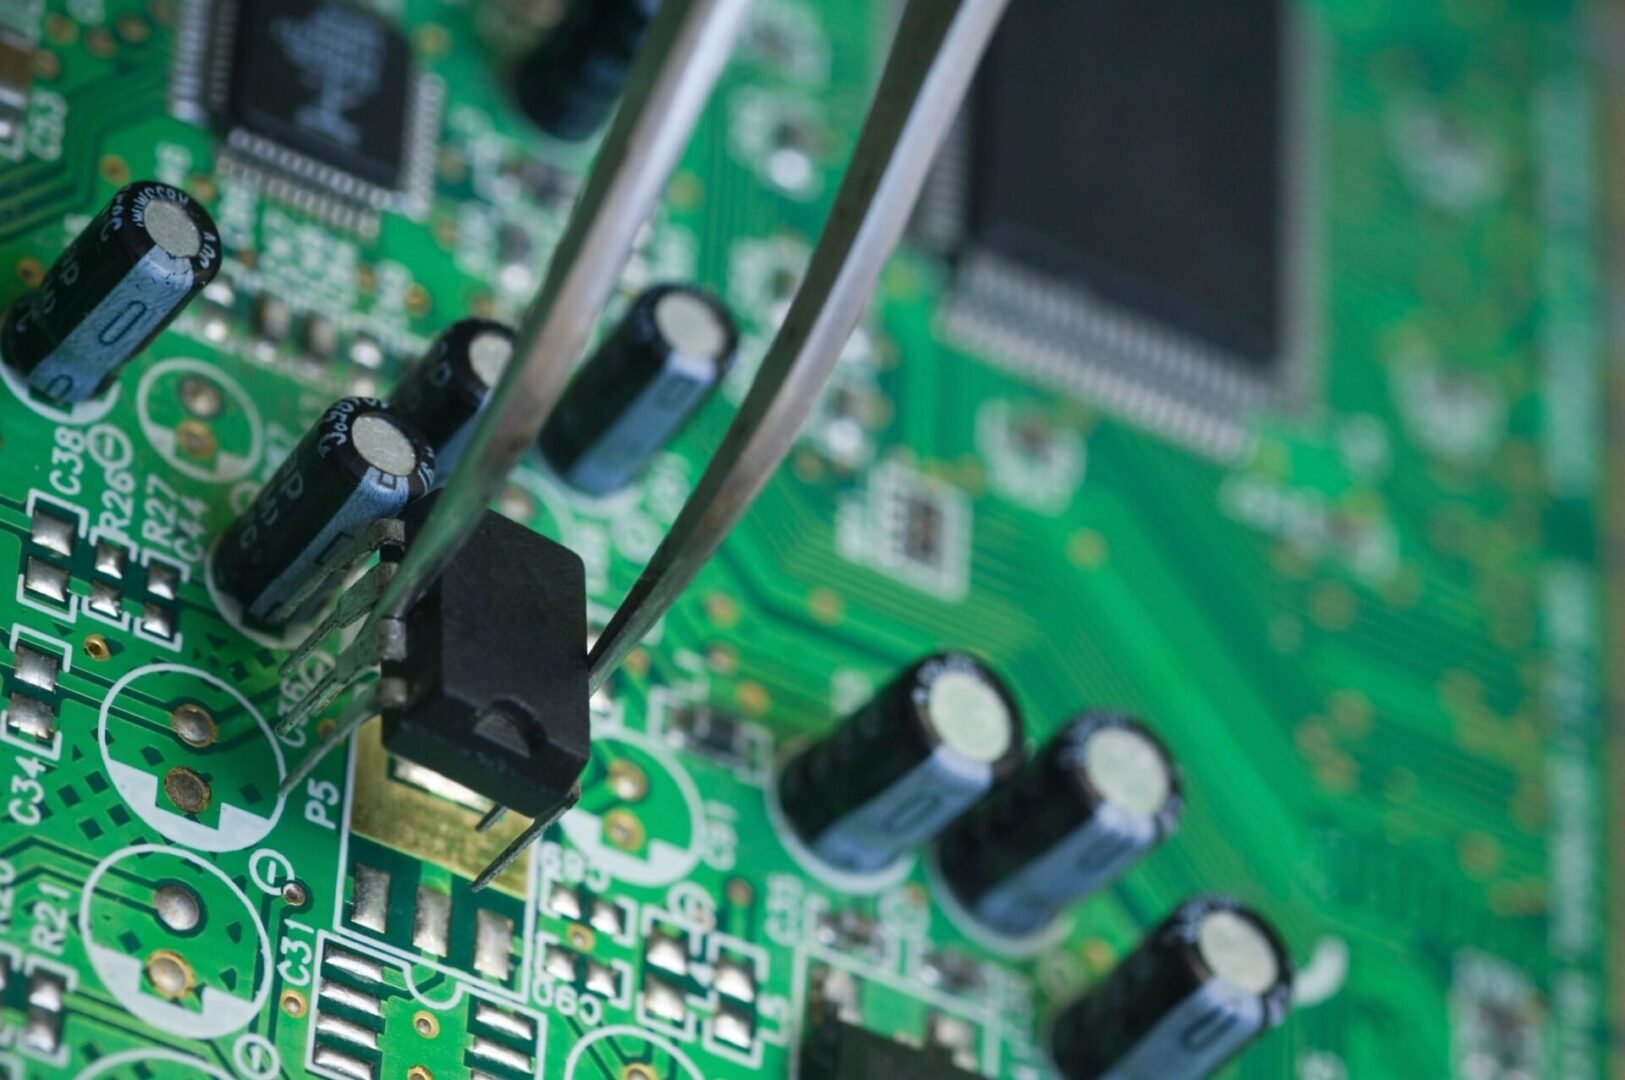 A close up of a circuit board with soldering tools